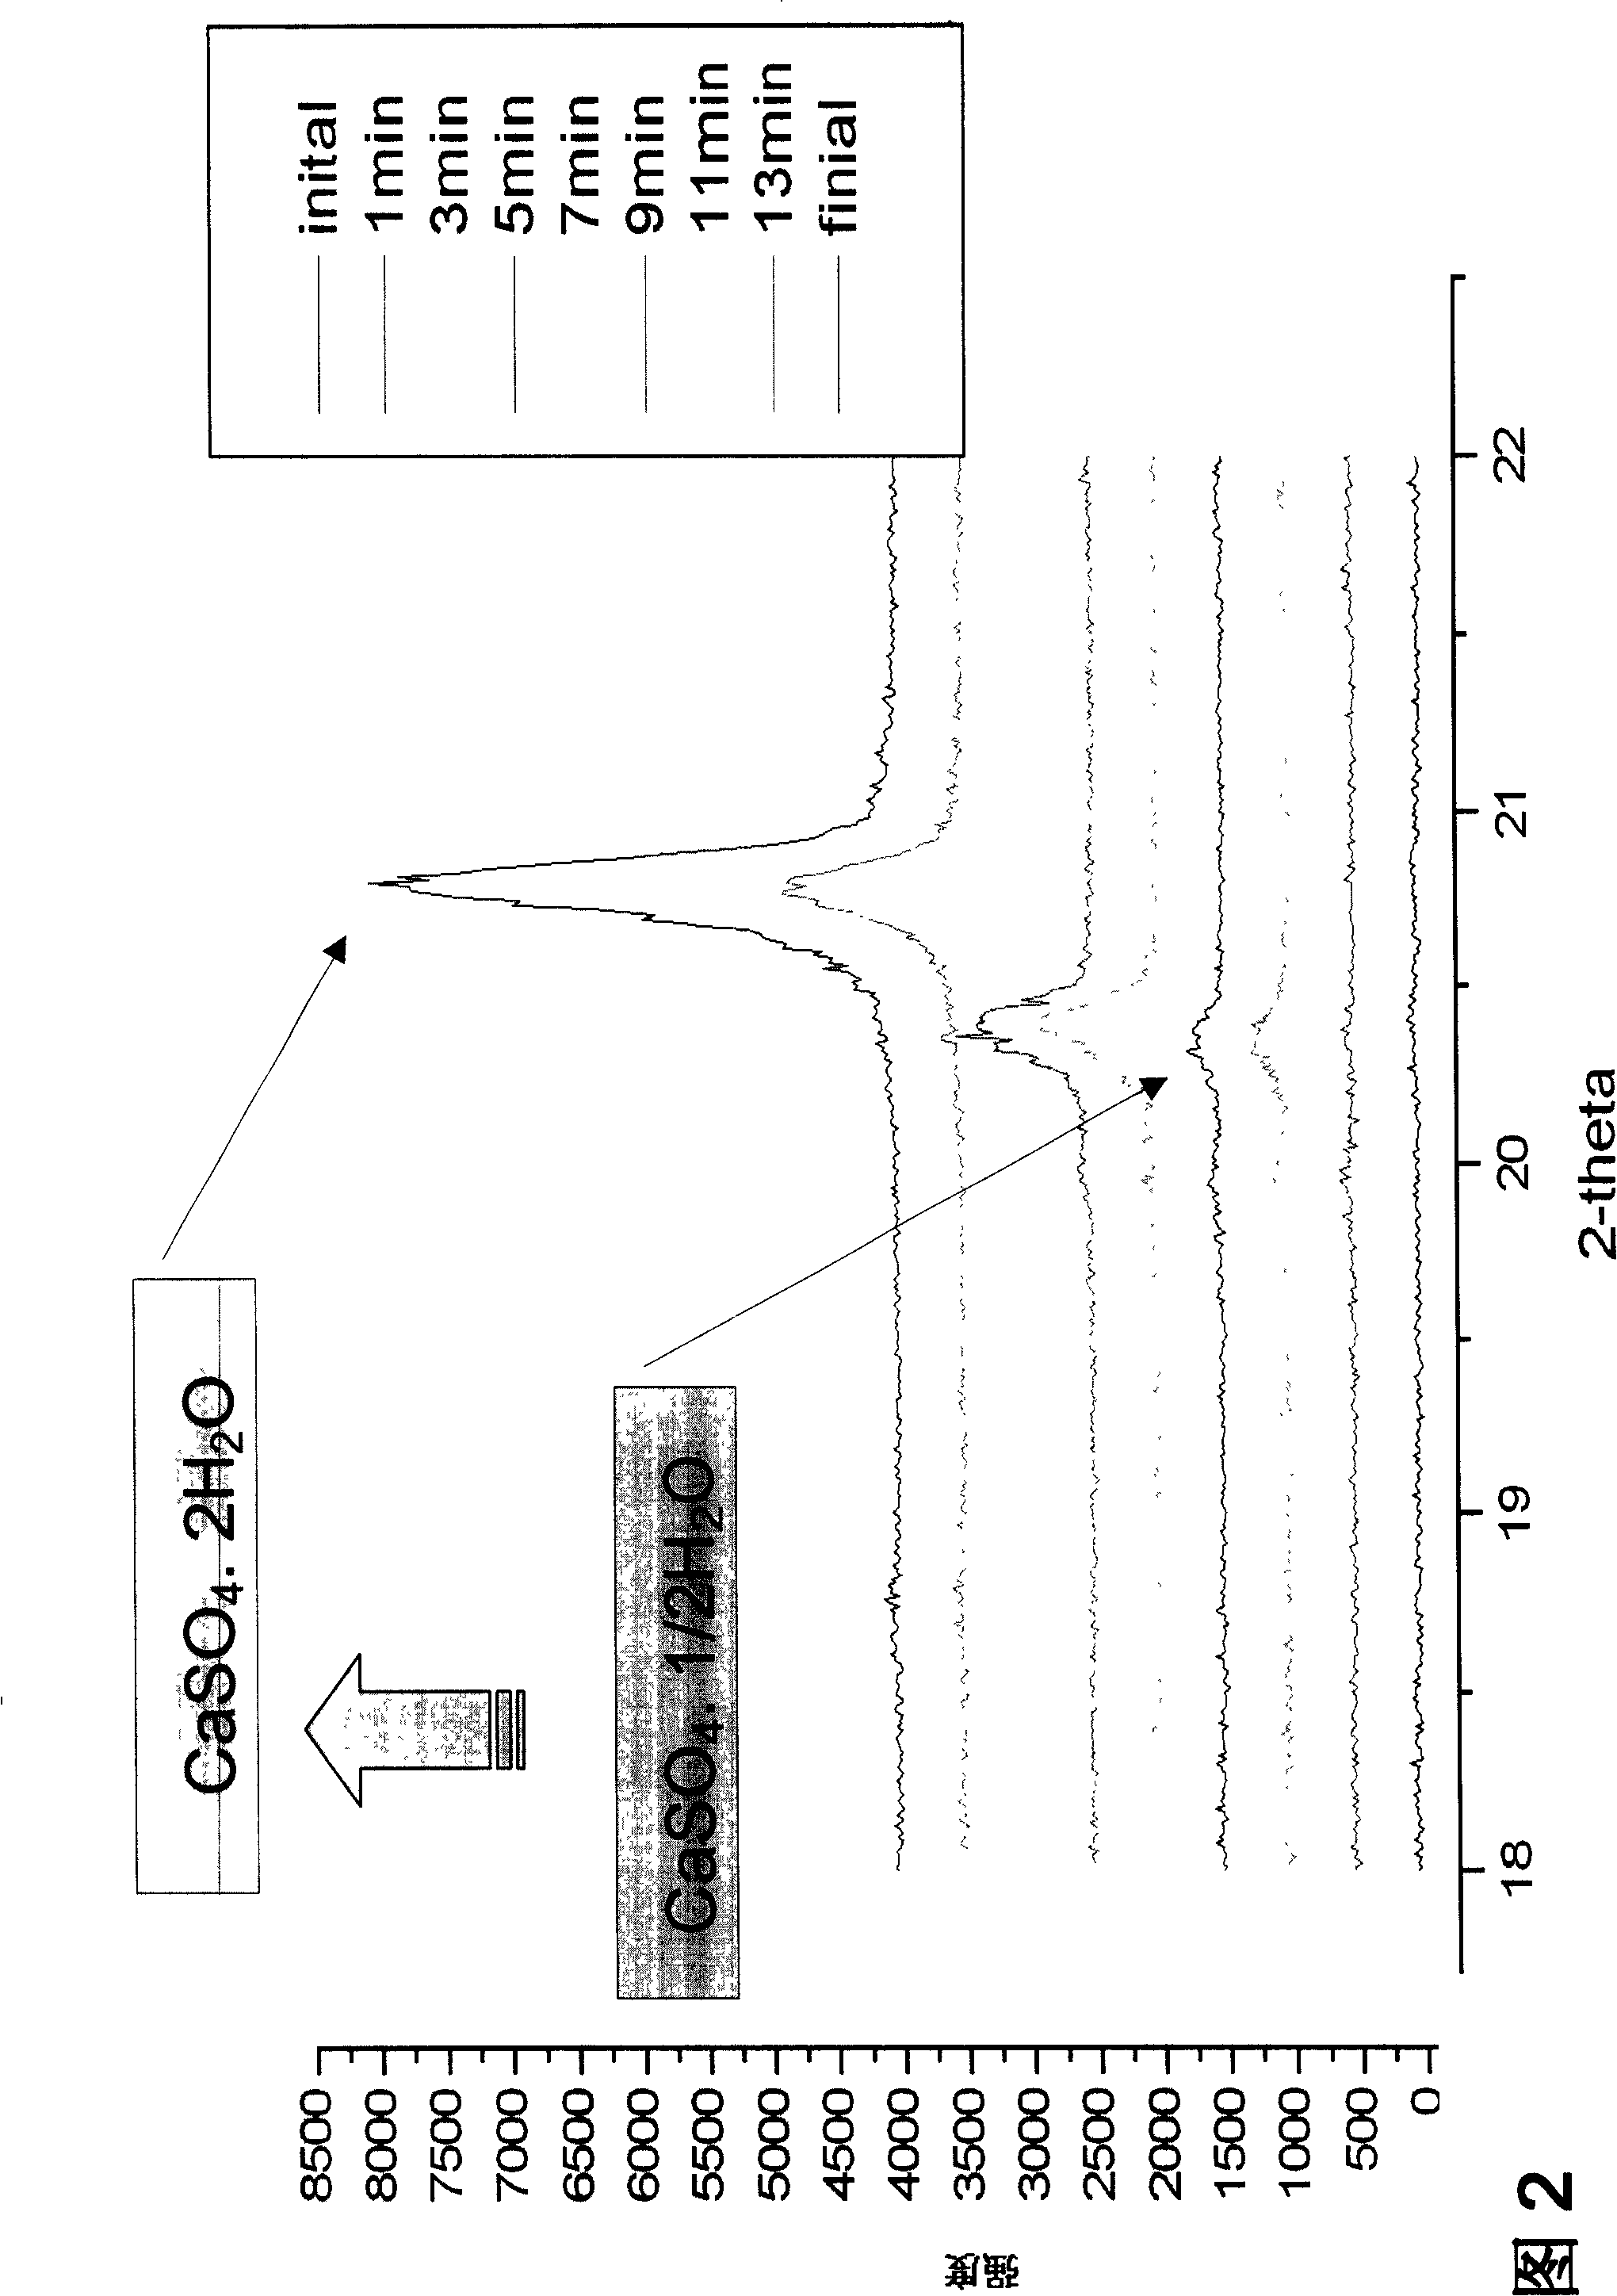 Method for controlling water-powder ratio of bone cement and hardening time